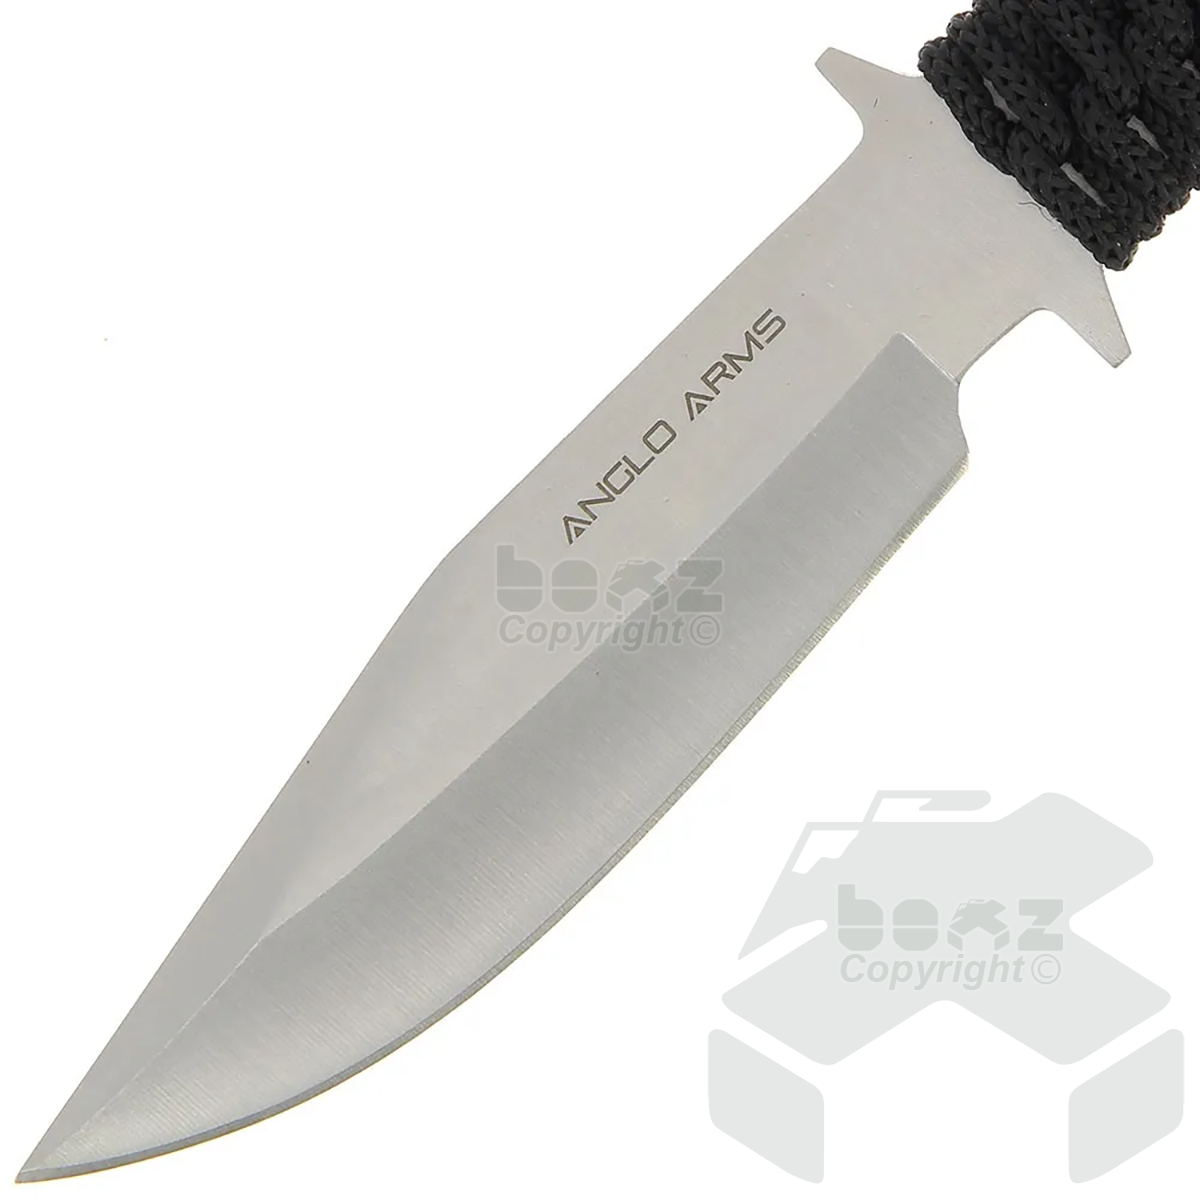 Anglo Arms Fixed Blade Knife 081 - Black Laced Knife with Sheath (081)